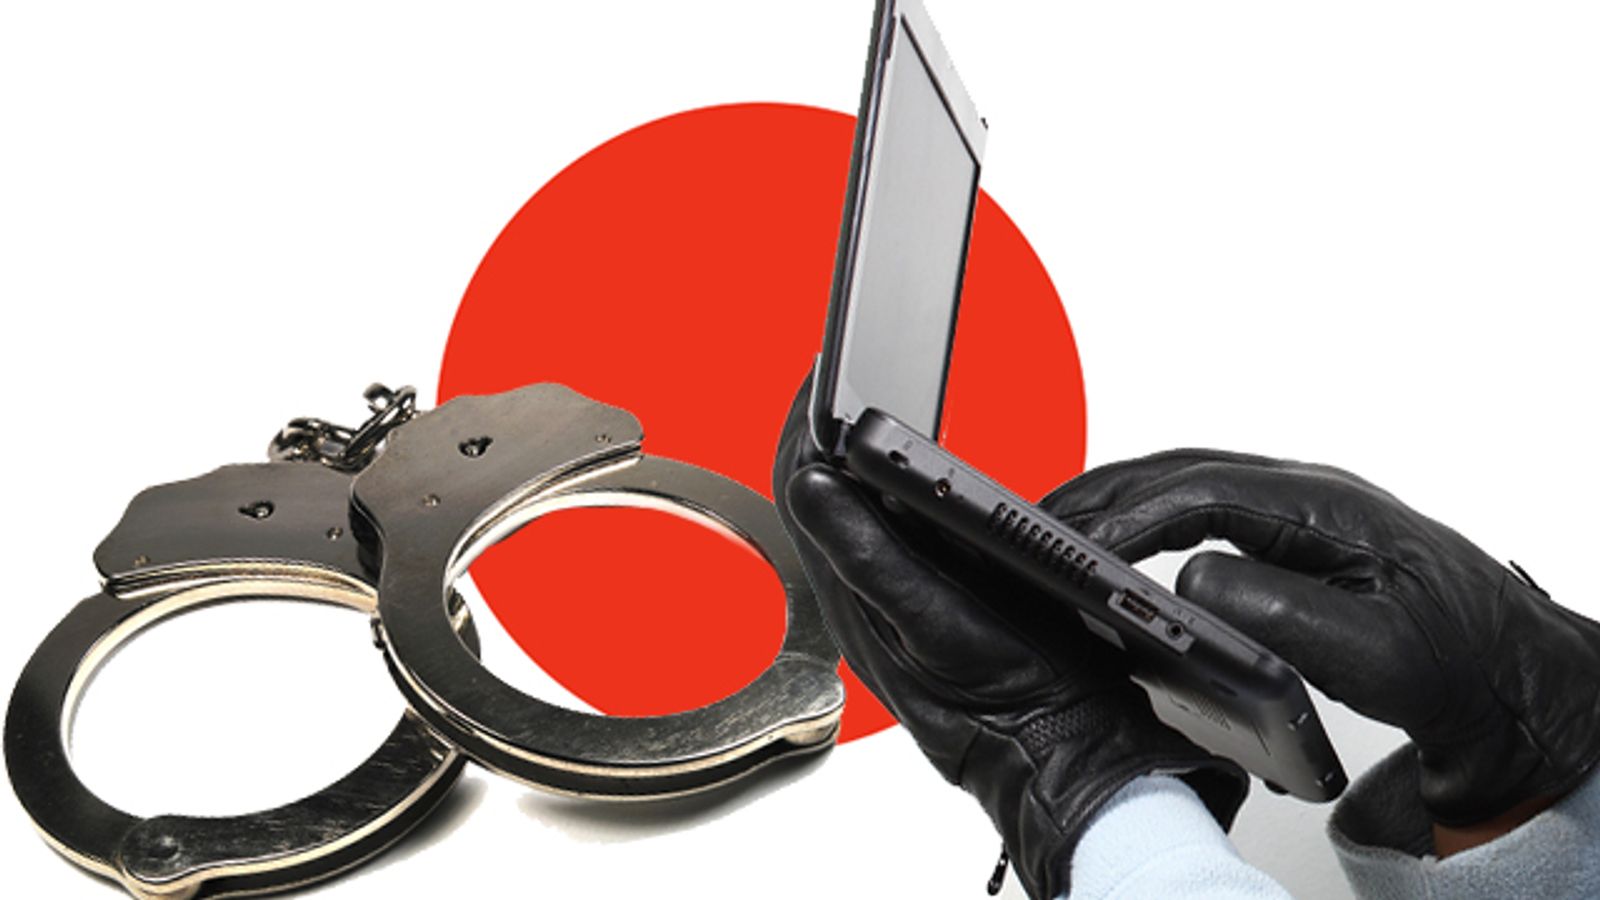 Japan Sets New Record for Cyber-Crime in 2009